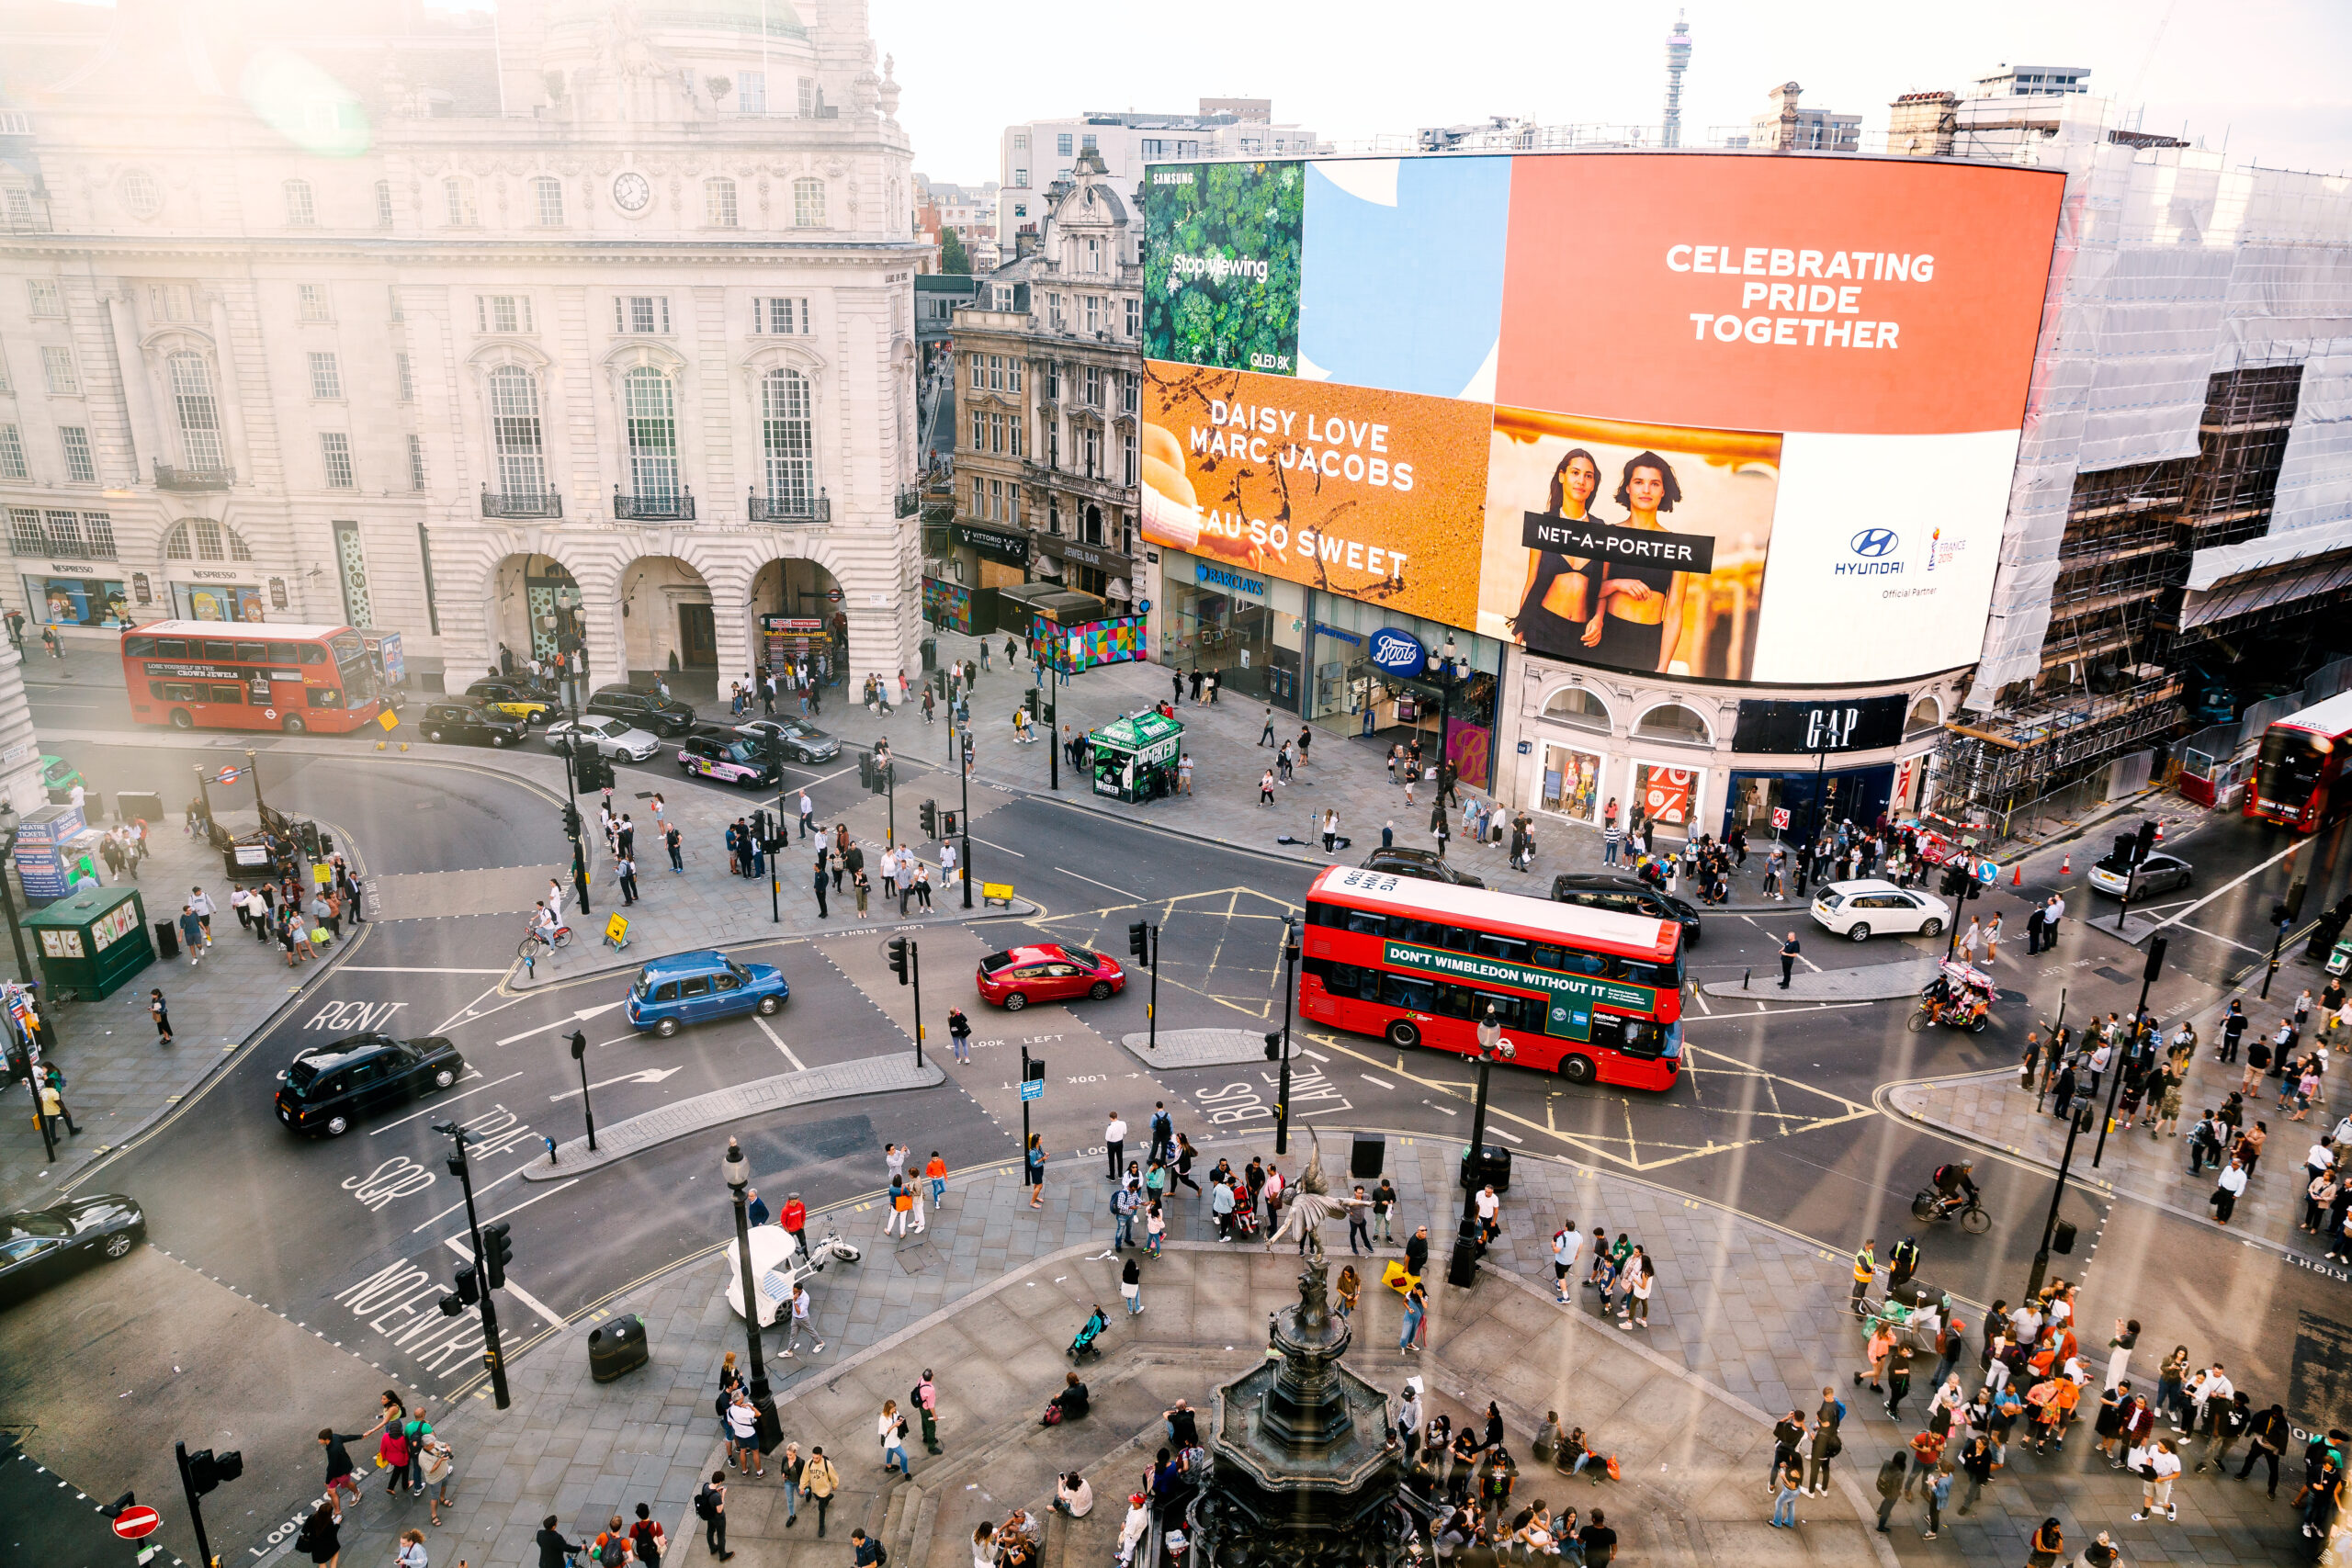 Piccadilly Circus lights could see bar open on top – South London News